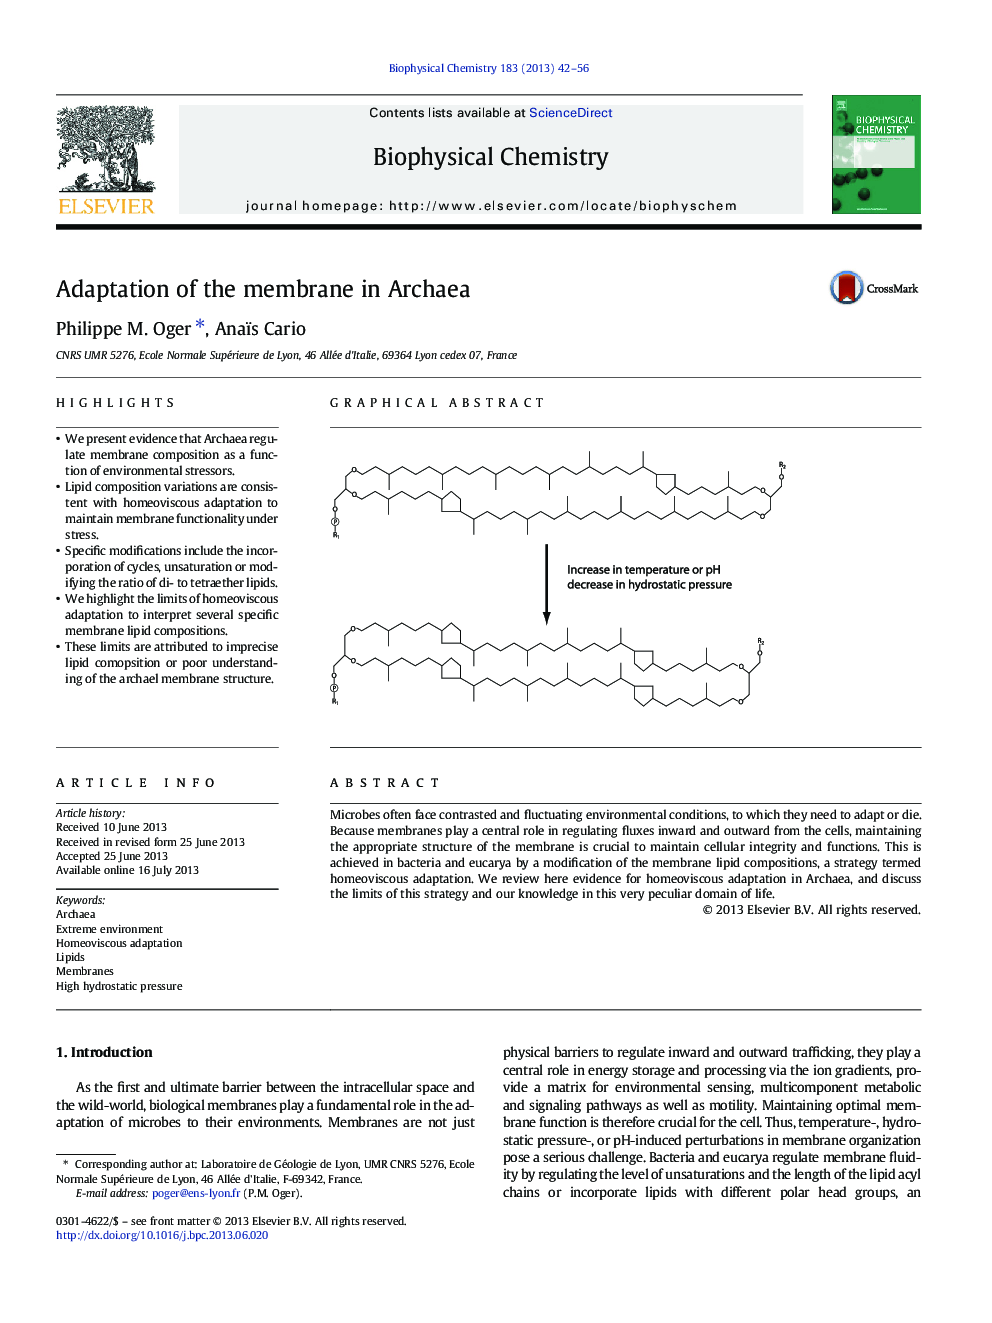 Adaptation of the membrane in Archaea